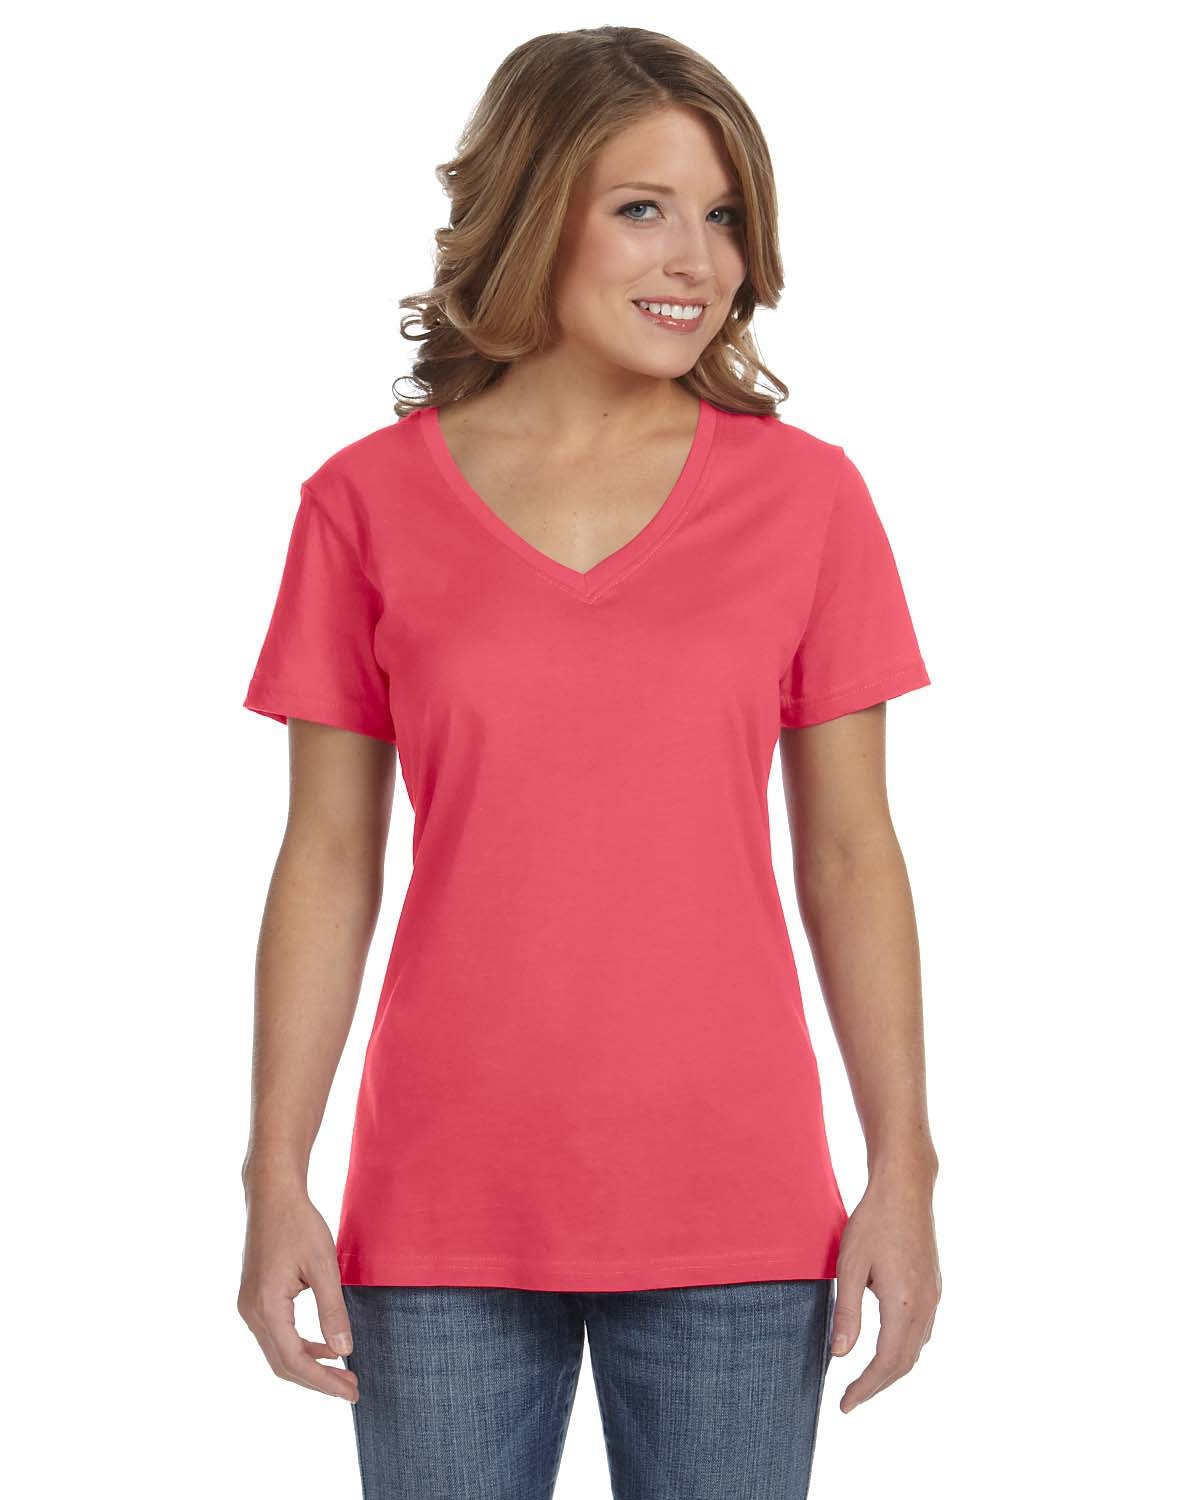 Anvil Ladies' Featherweight V-Neck T-Shirt